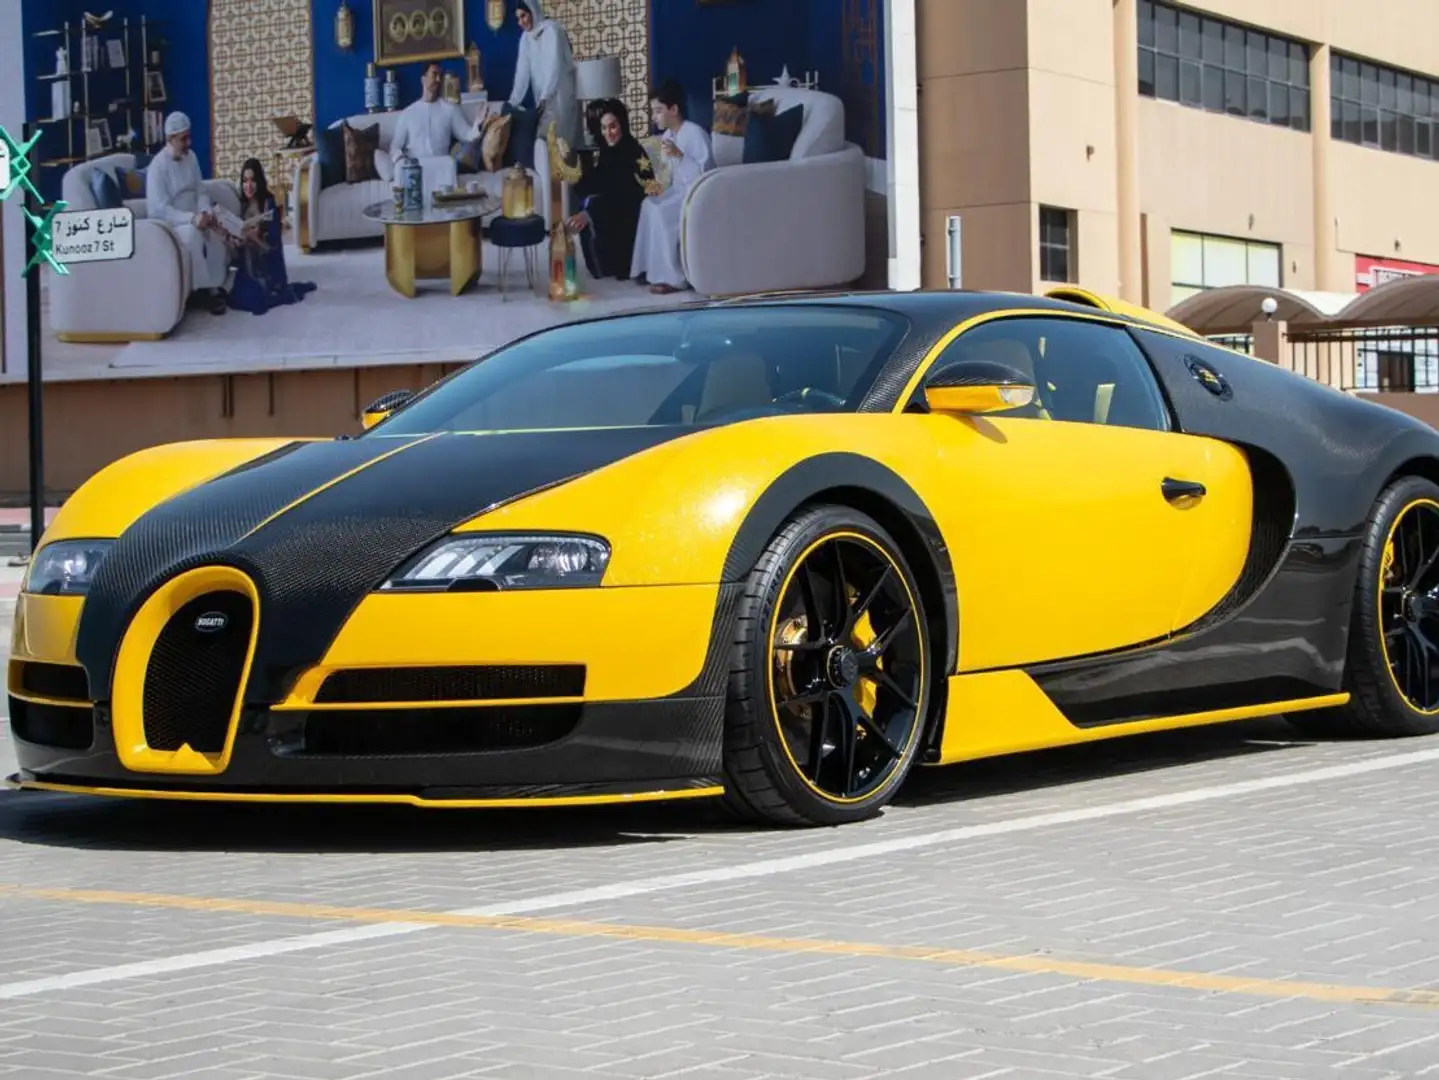 Bugatti Veyron Limited 1 of 1 by Oakley Design It can be Exported Gelb - 1